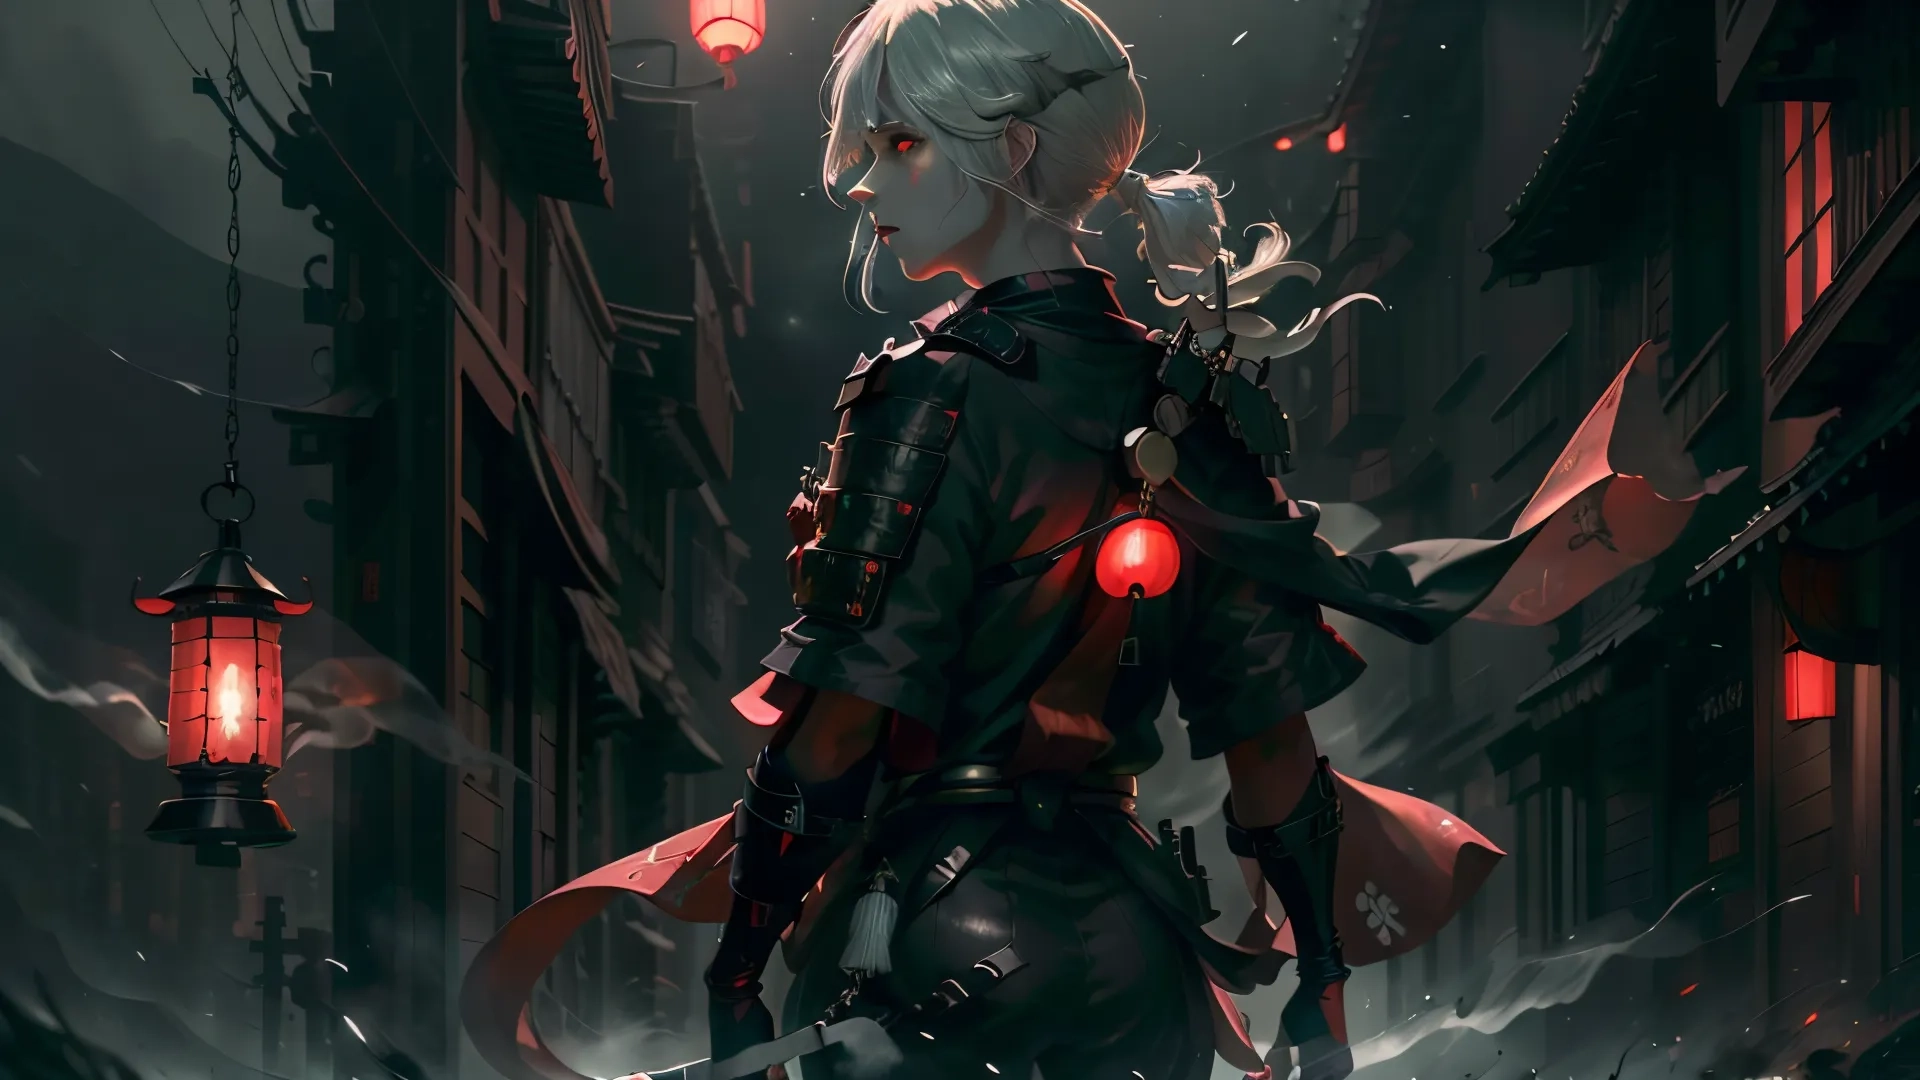 a woman with white hair looking out into a small town lit by lanterns and lanterns in the sky at night time at dusk in the city by some buildings
